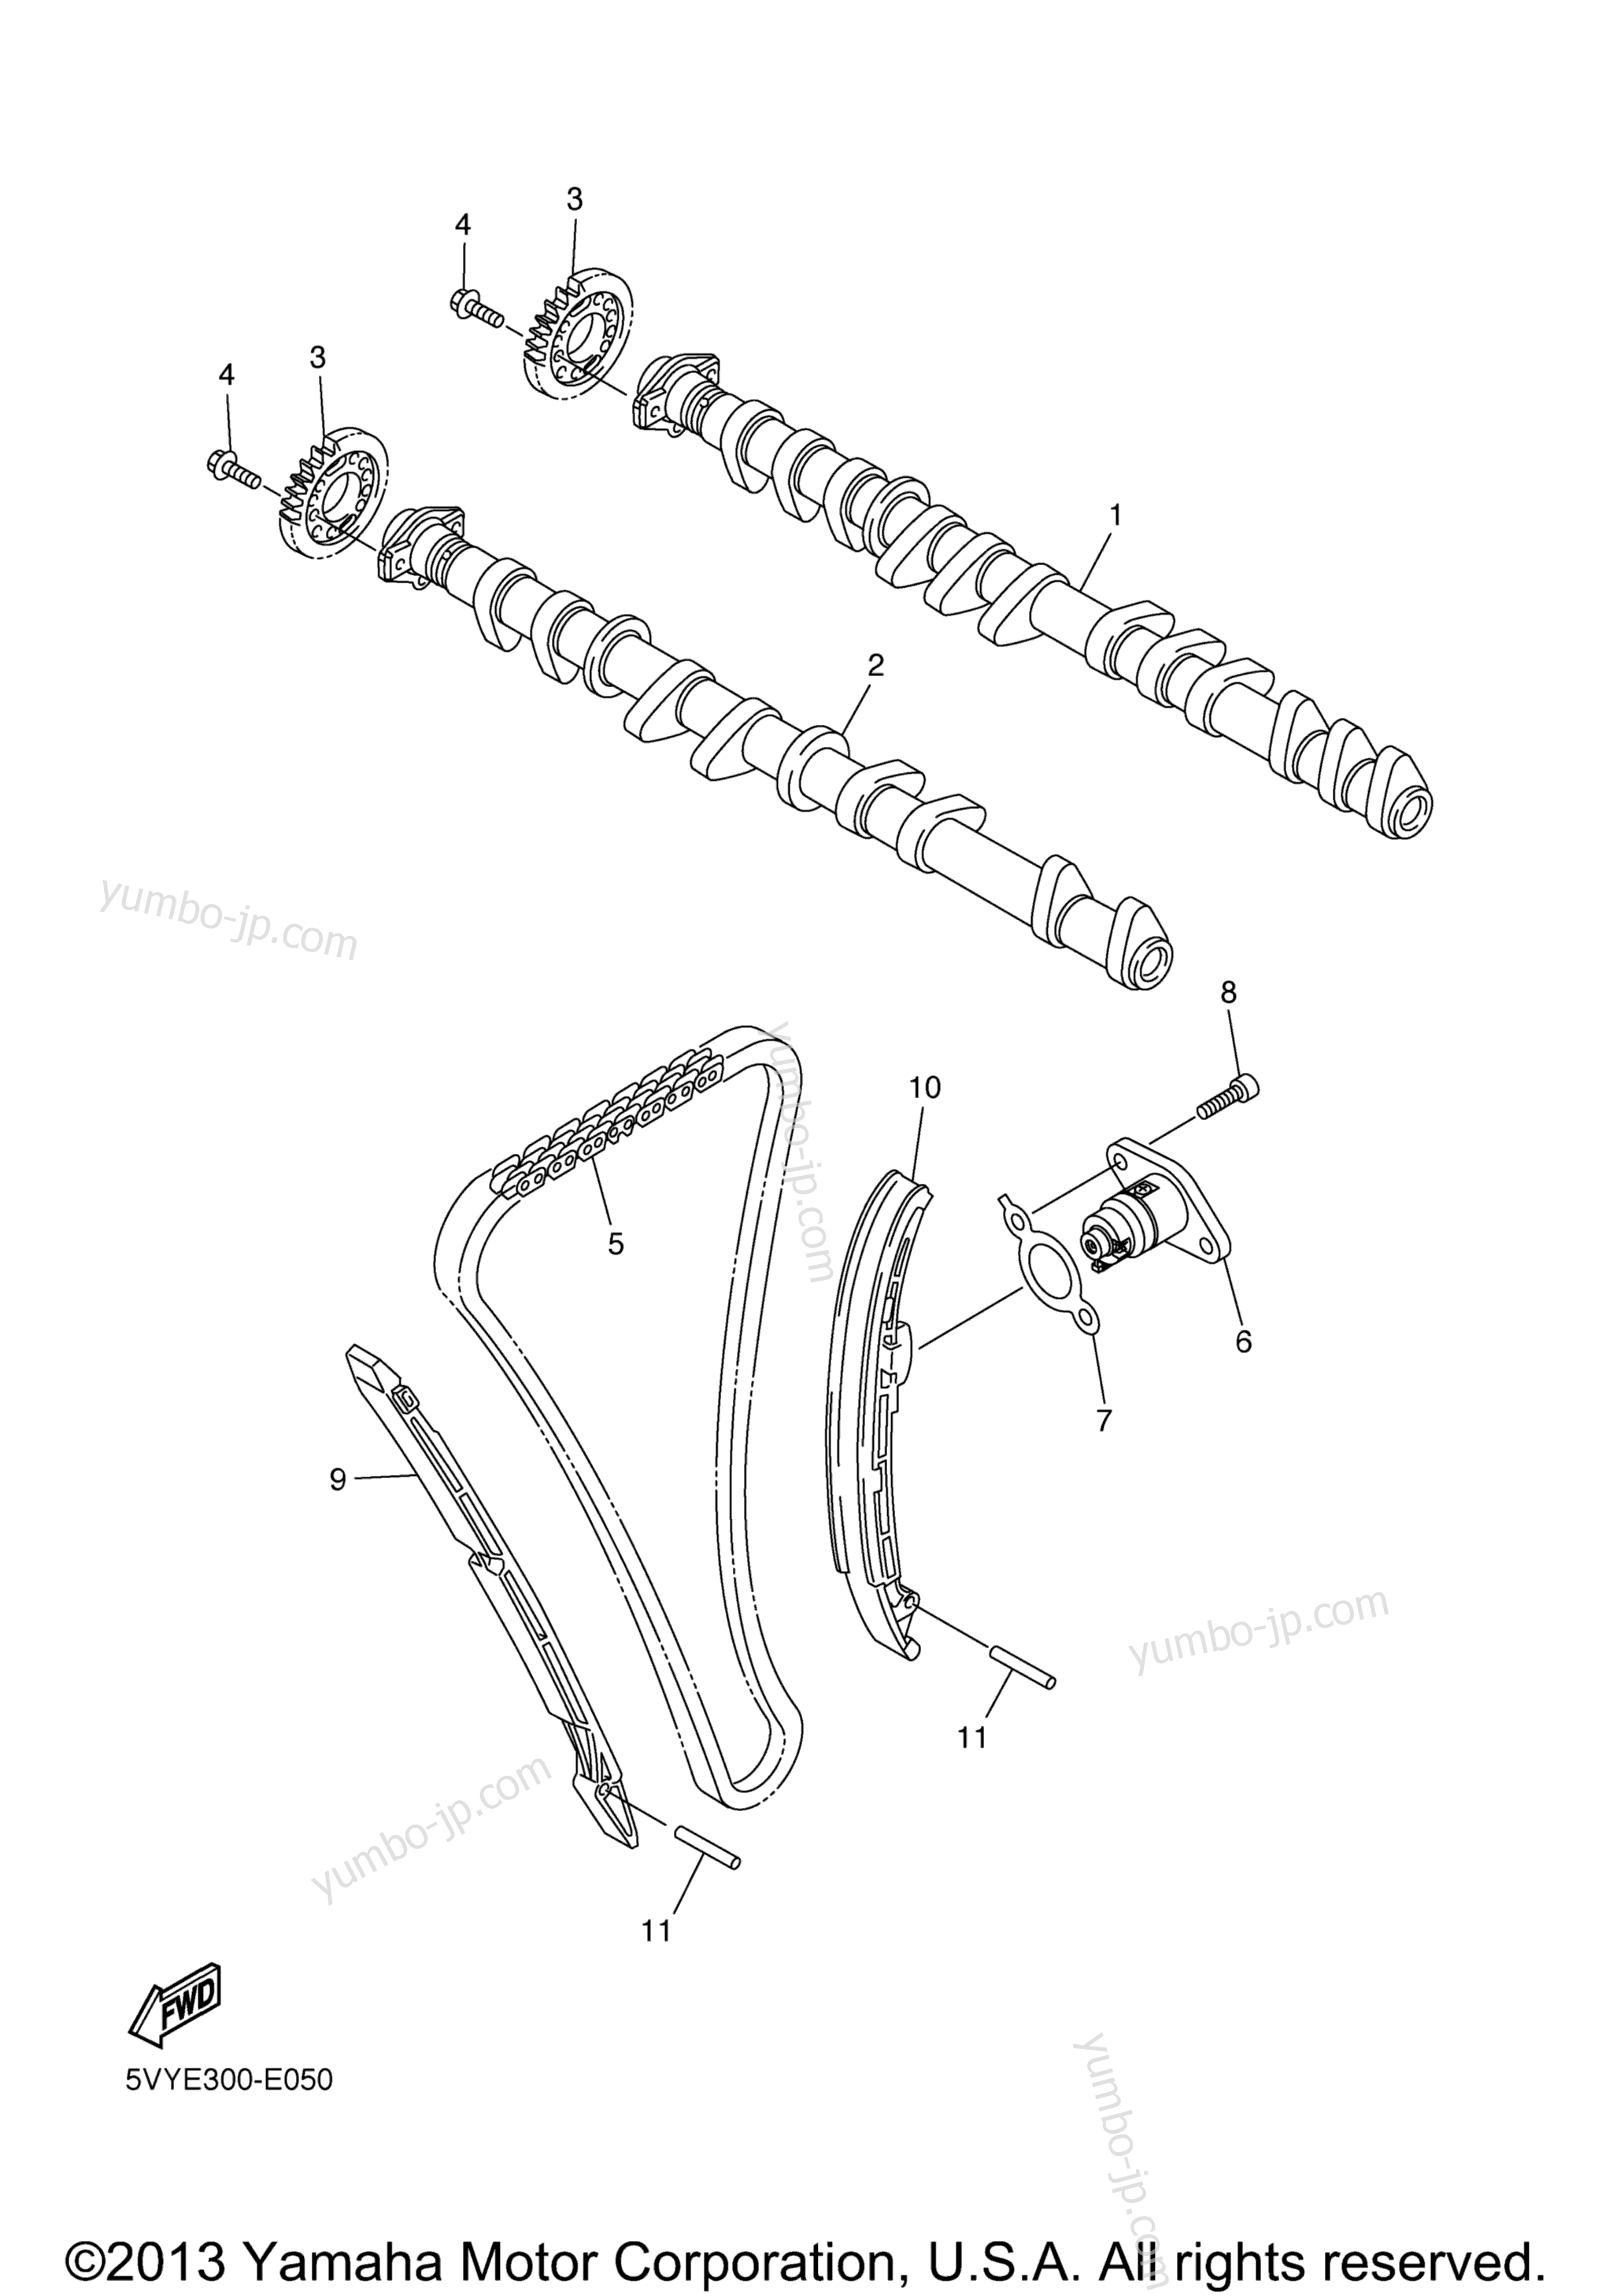 Camshaft Chain for motorcycles YAMAHA FZ-1 (FZS10V) 2006 year